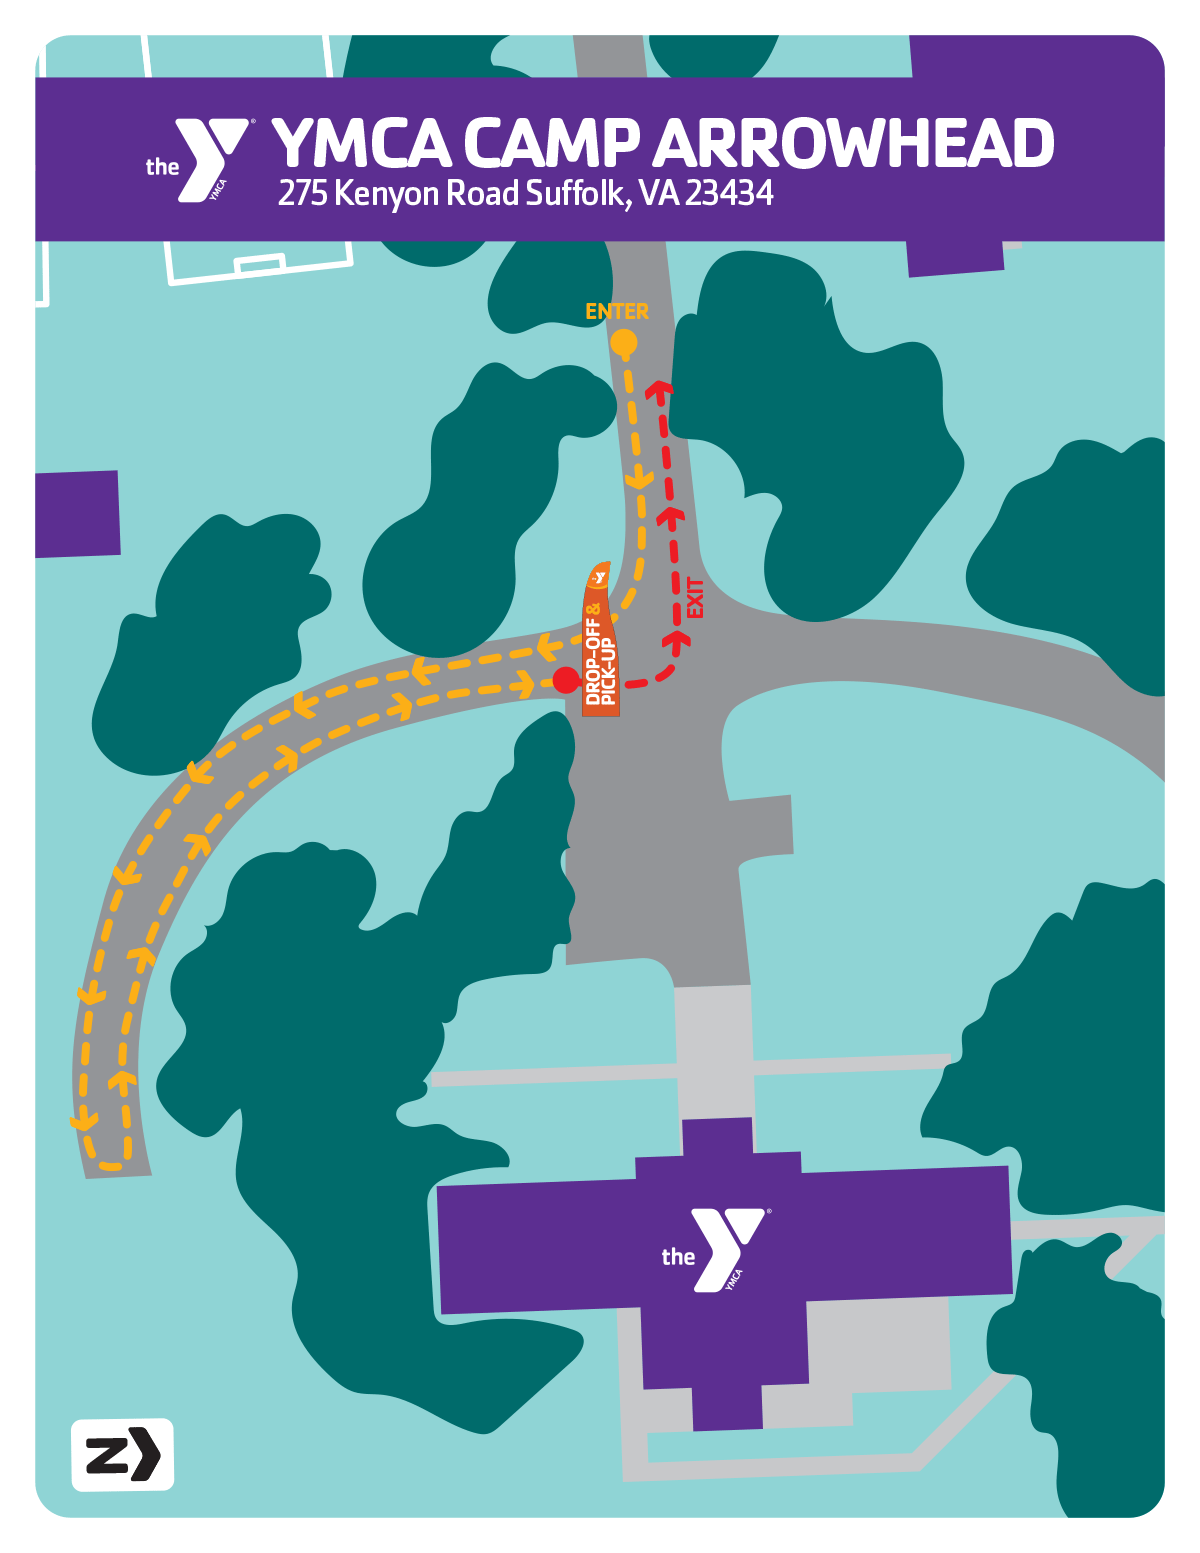 Summer camp drop-off & pick-up locations for the YMCA Camp Arrowhead